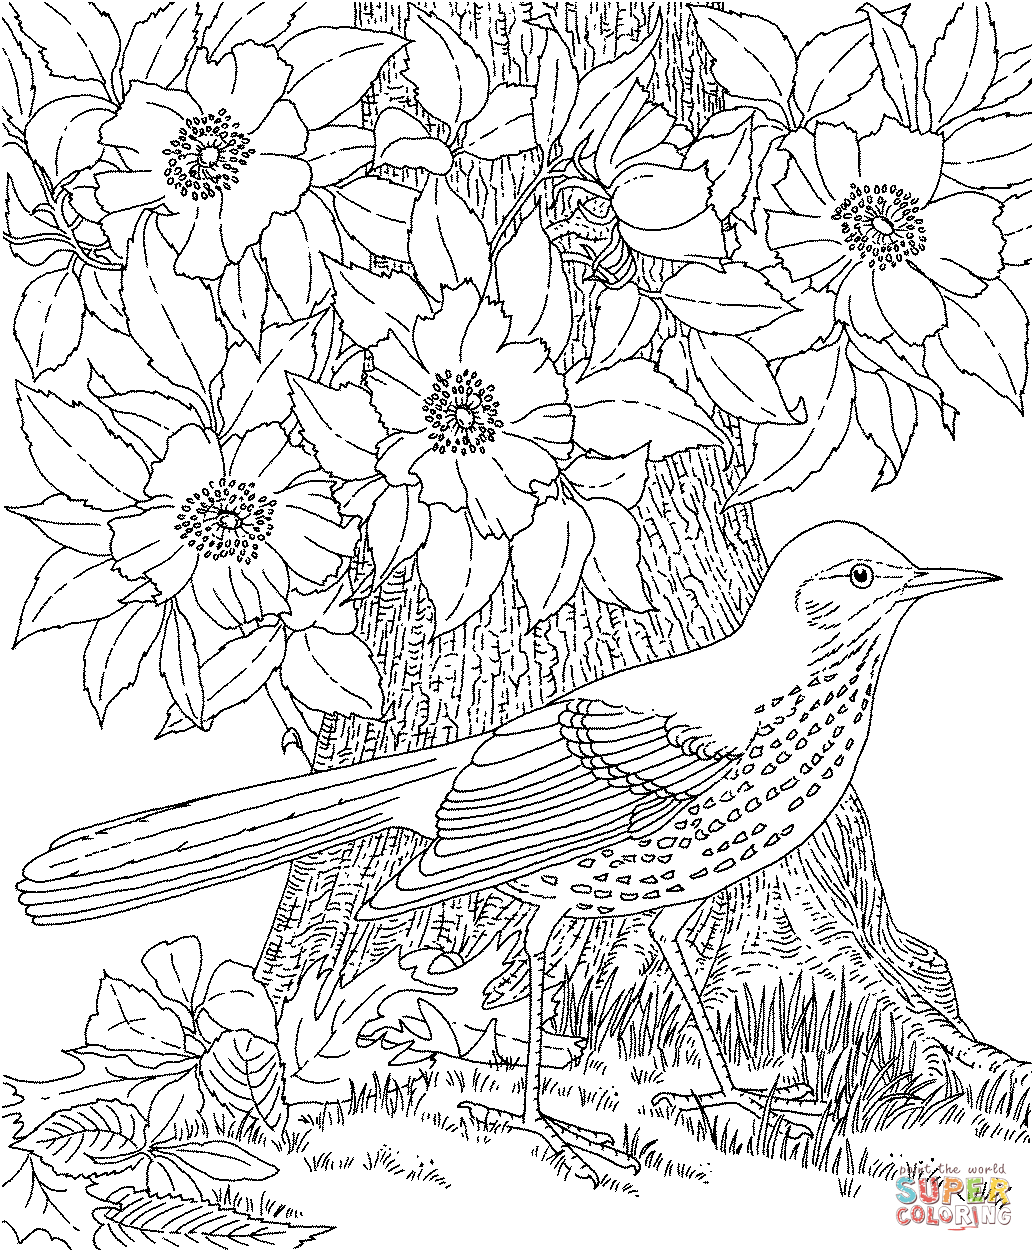 Brown Thrasher and Cherokee Rose Georgia Bird and Flower coloring page |  Free Printable Coloring Pages